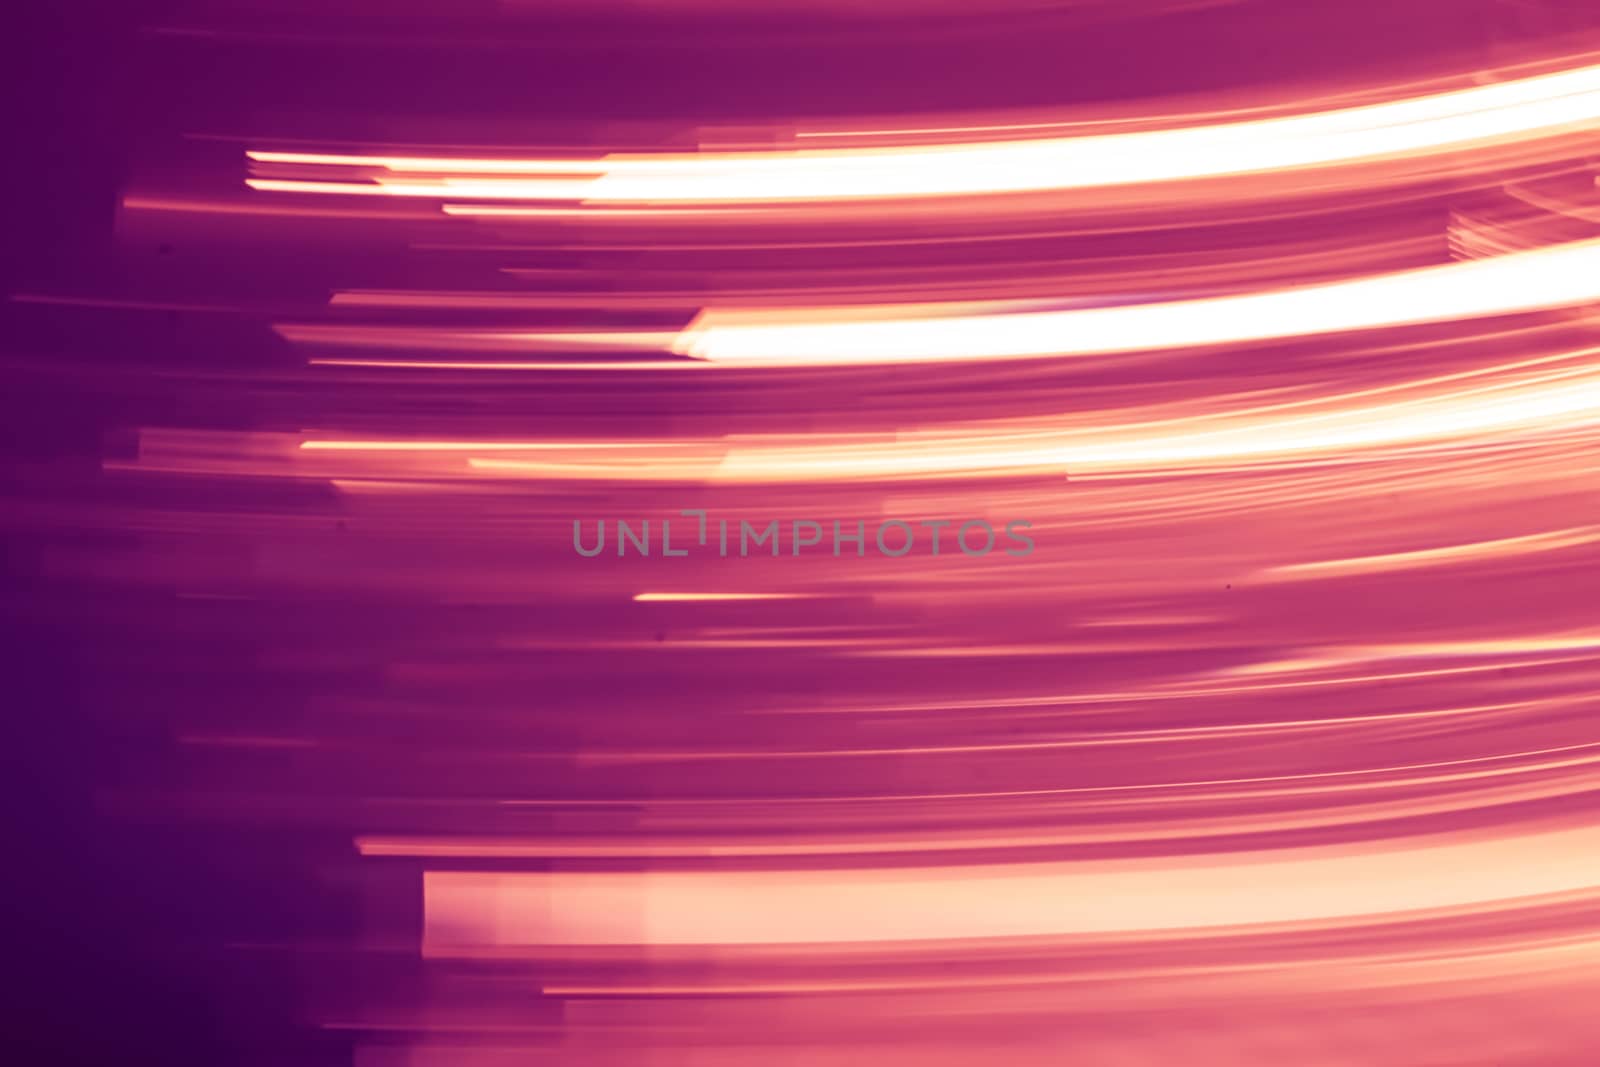 Light waves as abstract futuristic background, science and high tech design by Anneleven